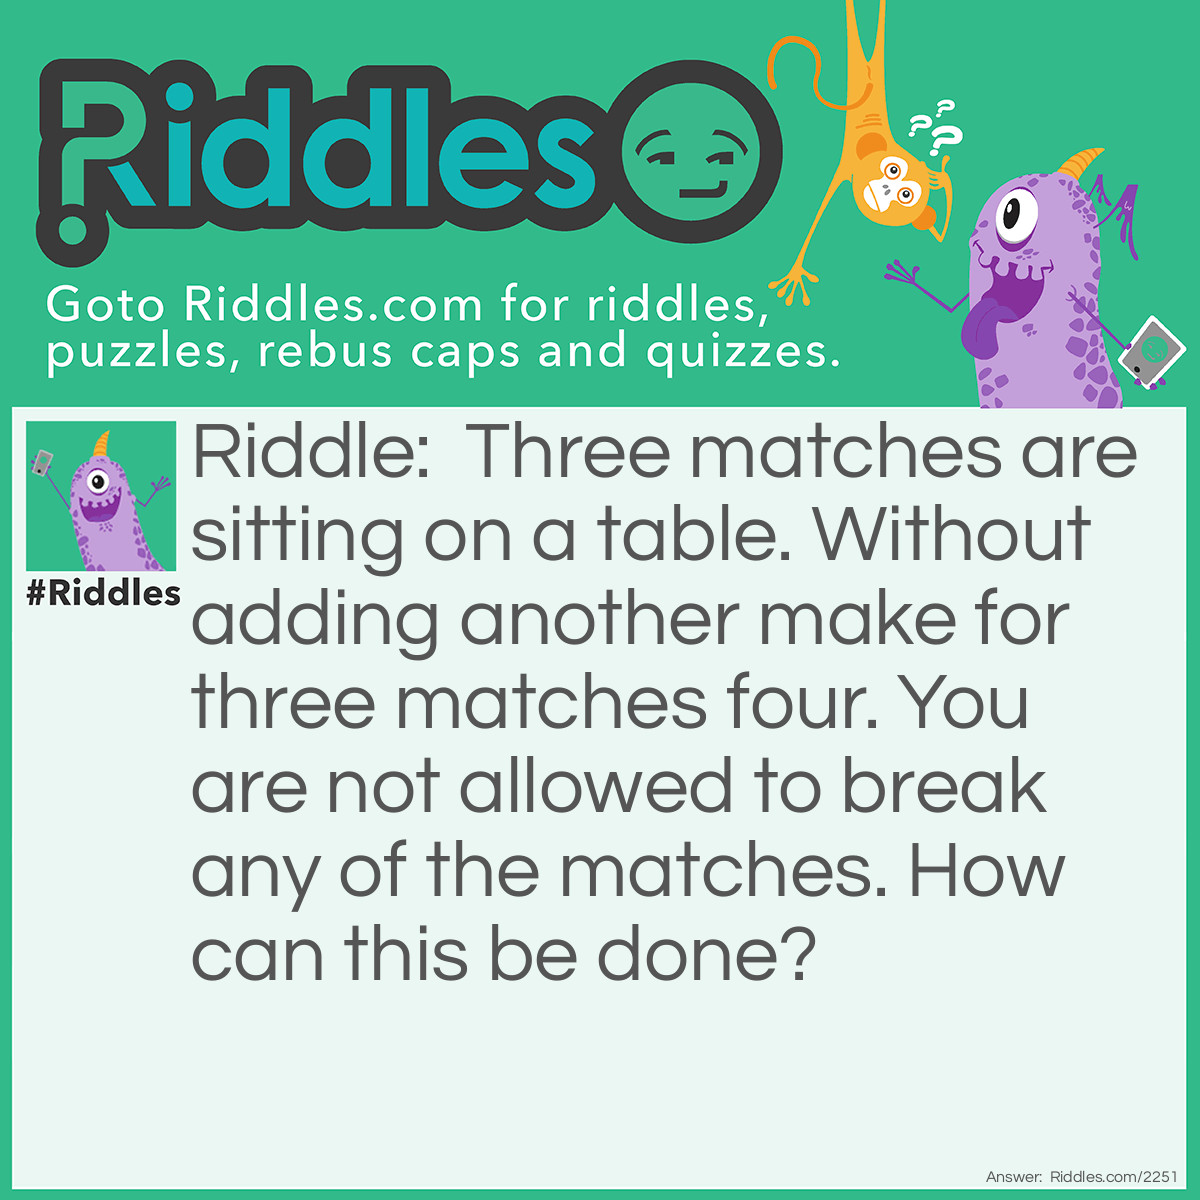 Riddle: Three matches are sitting on a table. Without adding another make for three matches four. You are not allowed to break any of the matches. How can this be done? Answer: Shape the 3 matches into a roman numeral four.